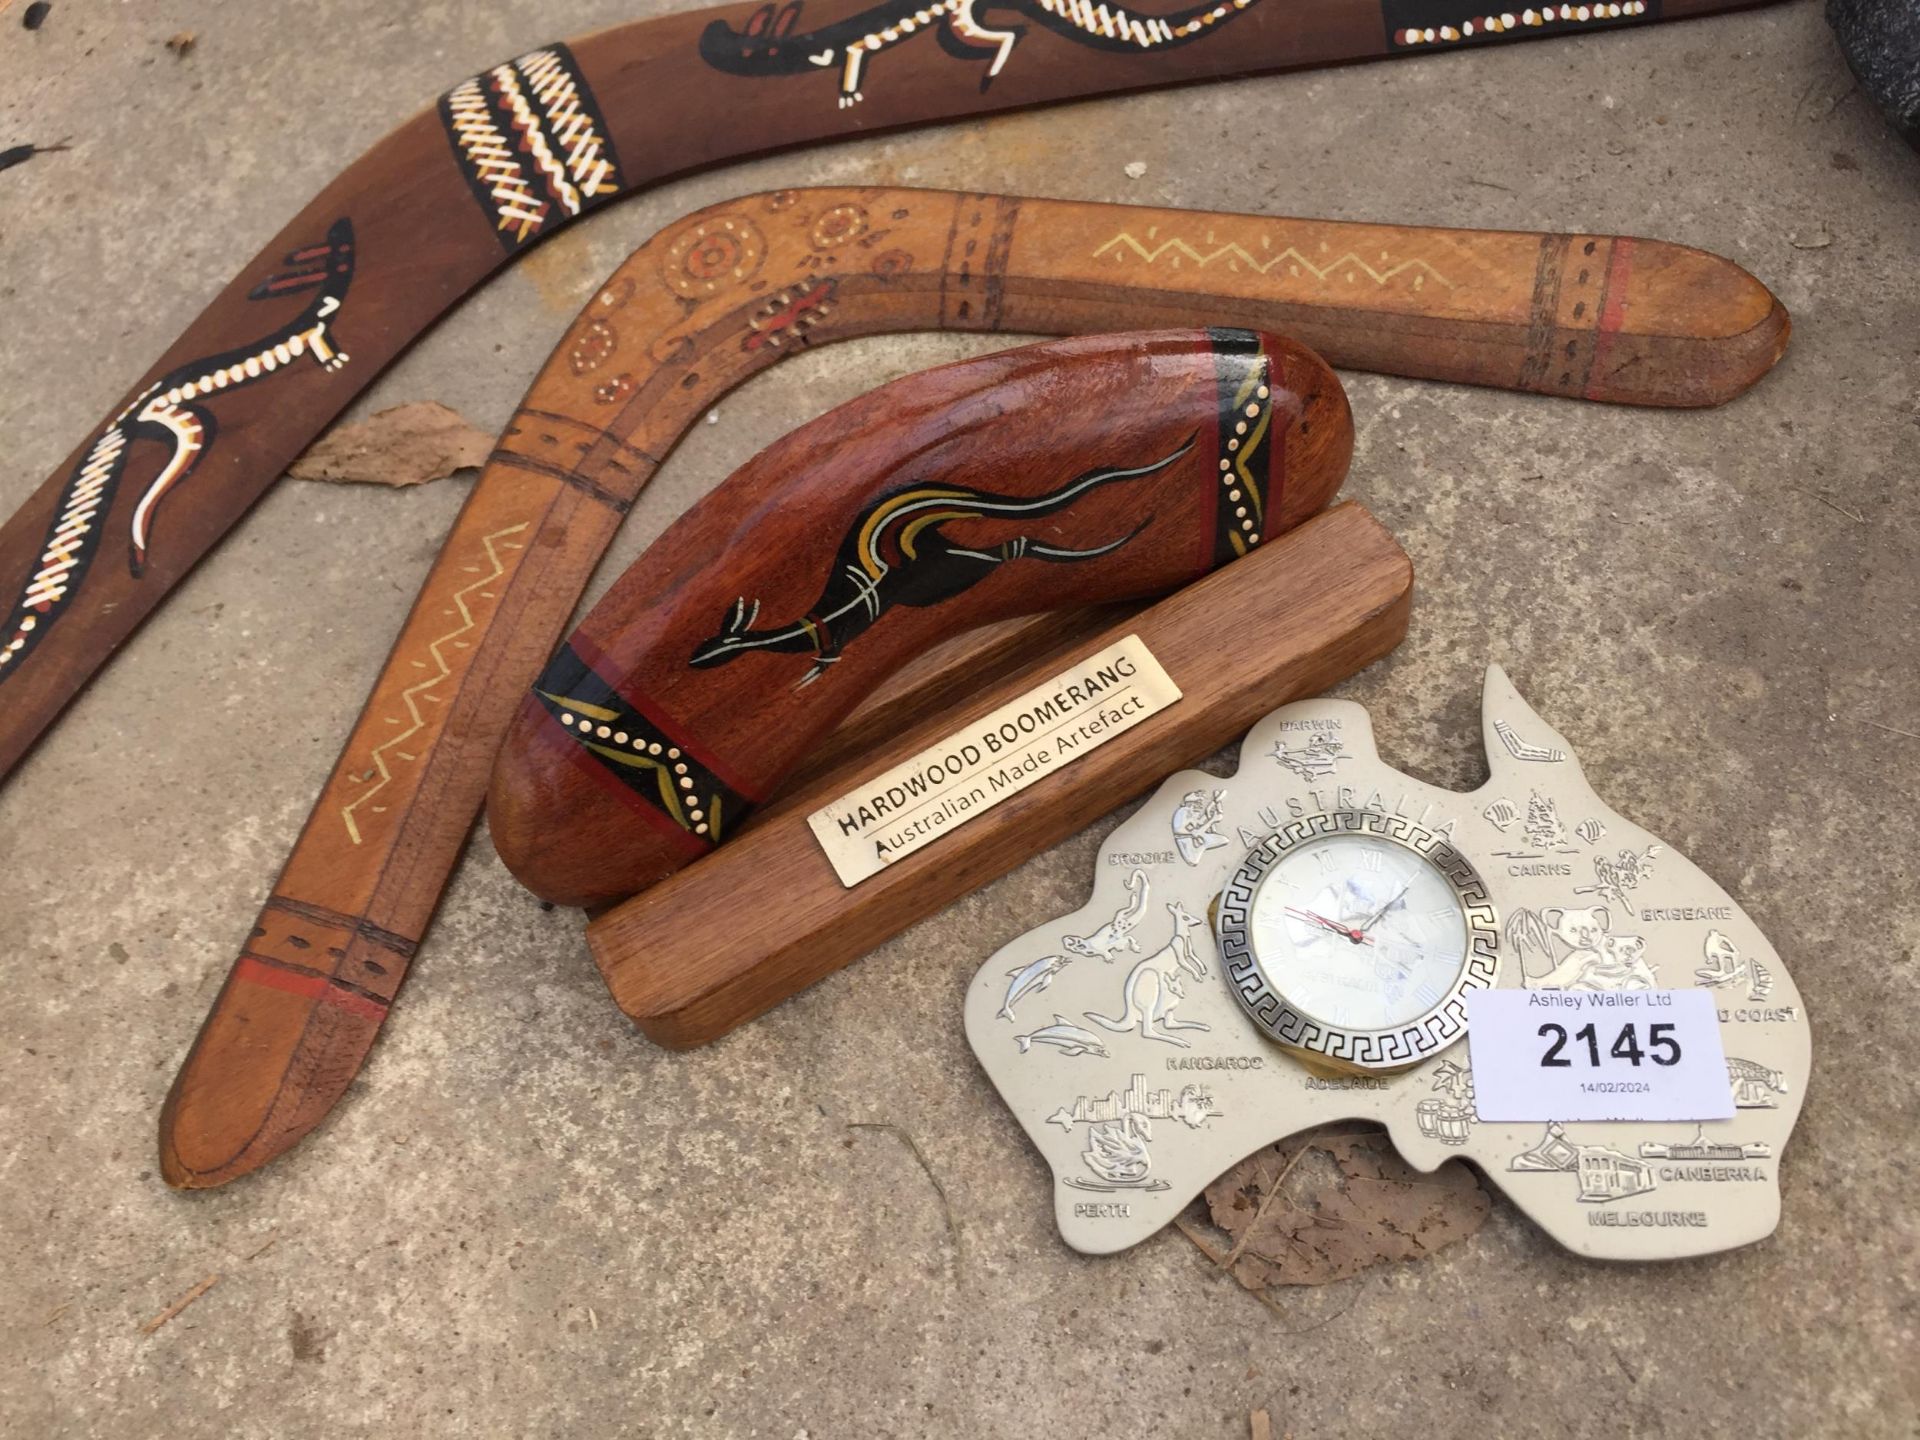 THREE WOODEN BOOMERANGS AND A CLOCK SET IN A MAP OF AUSTRALIA - Image 2 of 2